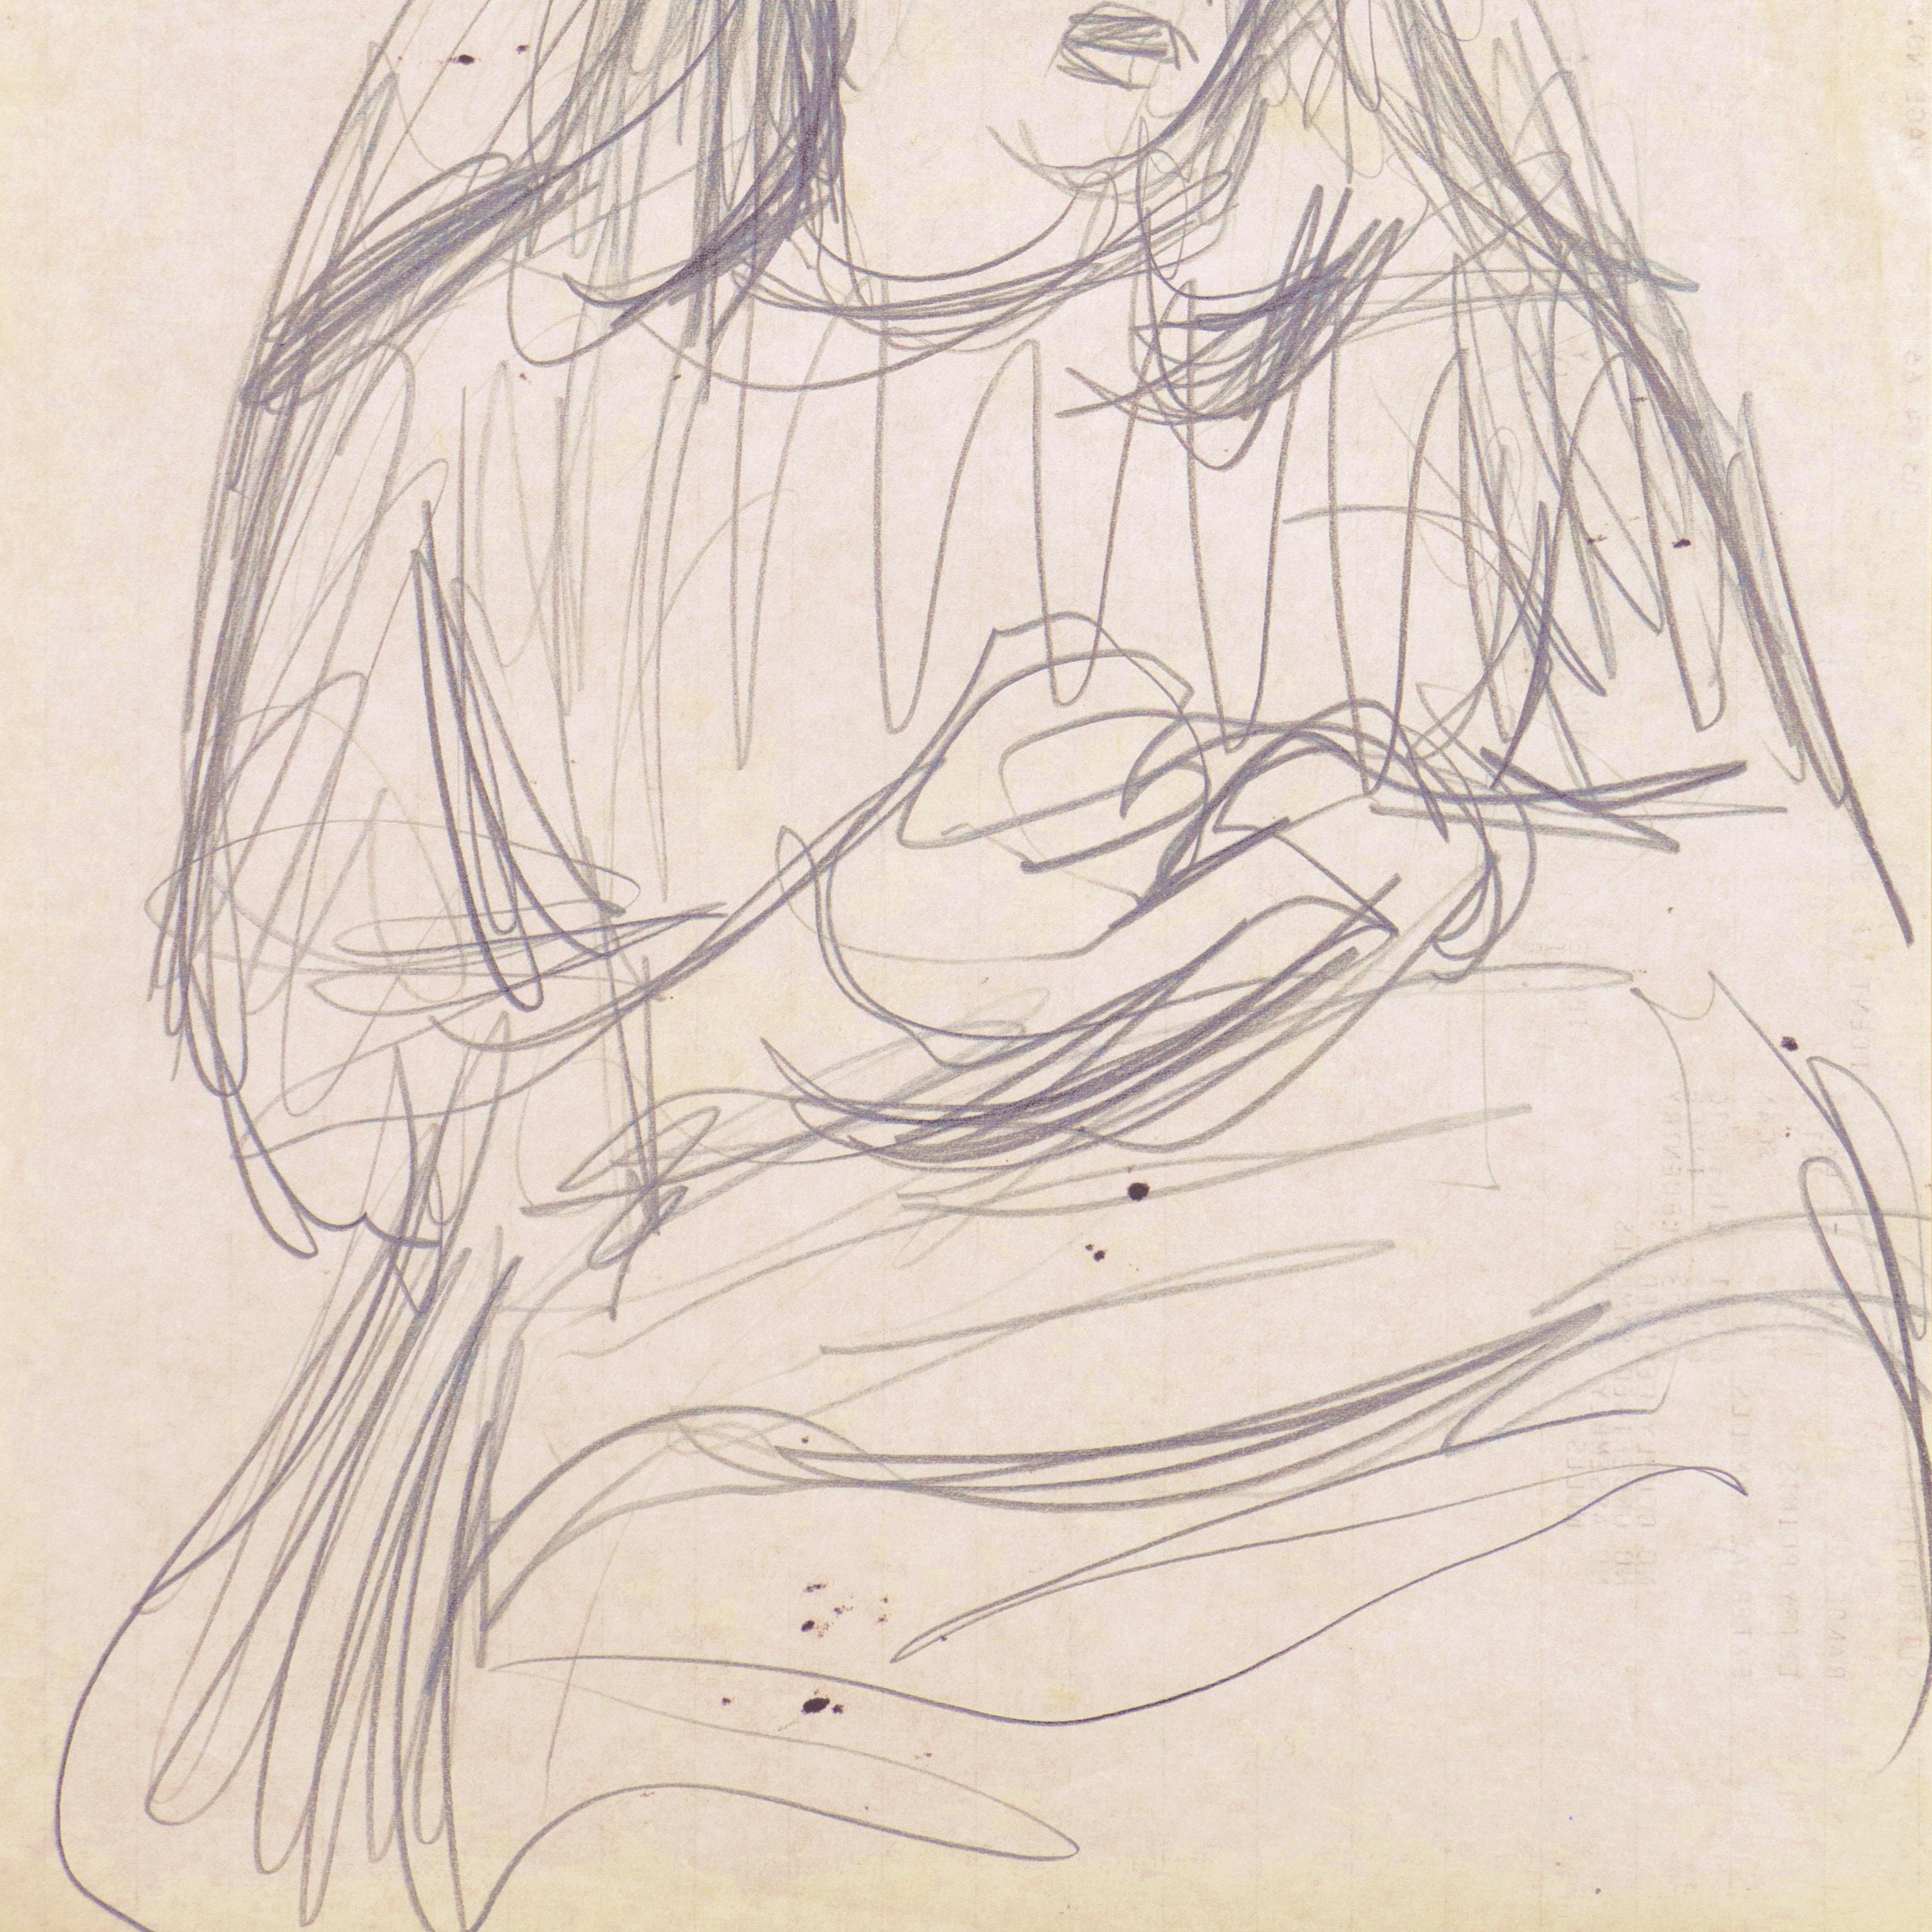 Painted by Victor Di Gesu (American, 1914-1988) circa 1955 and stamped, verso, with Victor di Gesu estate stamp.

A bold, expressionist drawing showing a young woman seated in a chair with her hands clasped. 

Winner of the Prix Othon Friesz, Victor